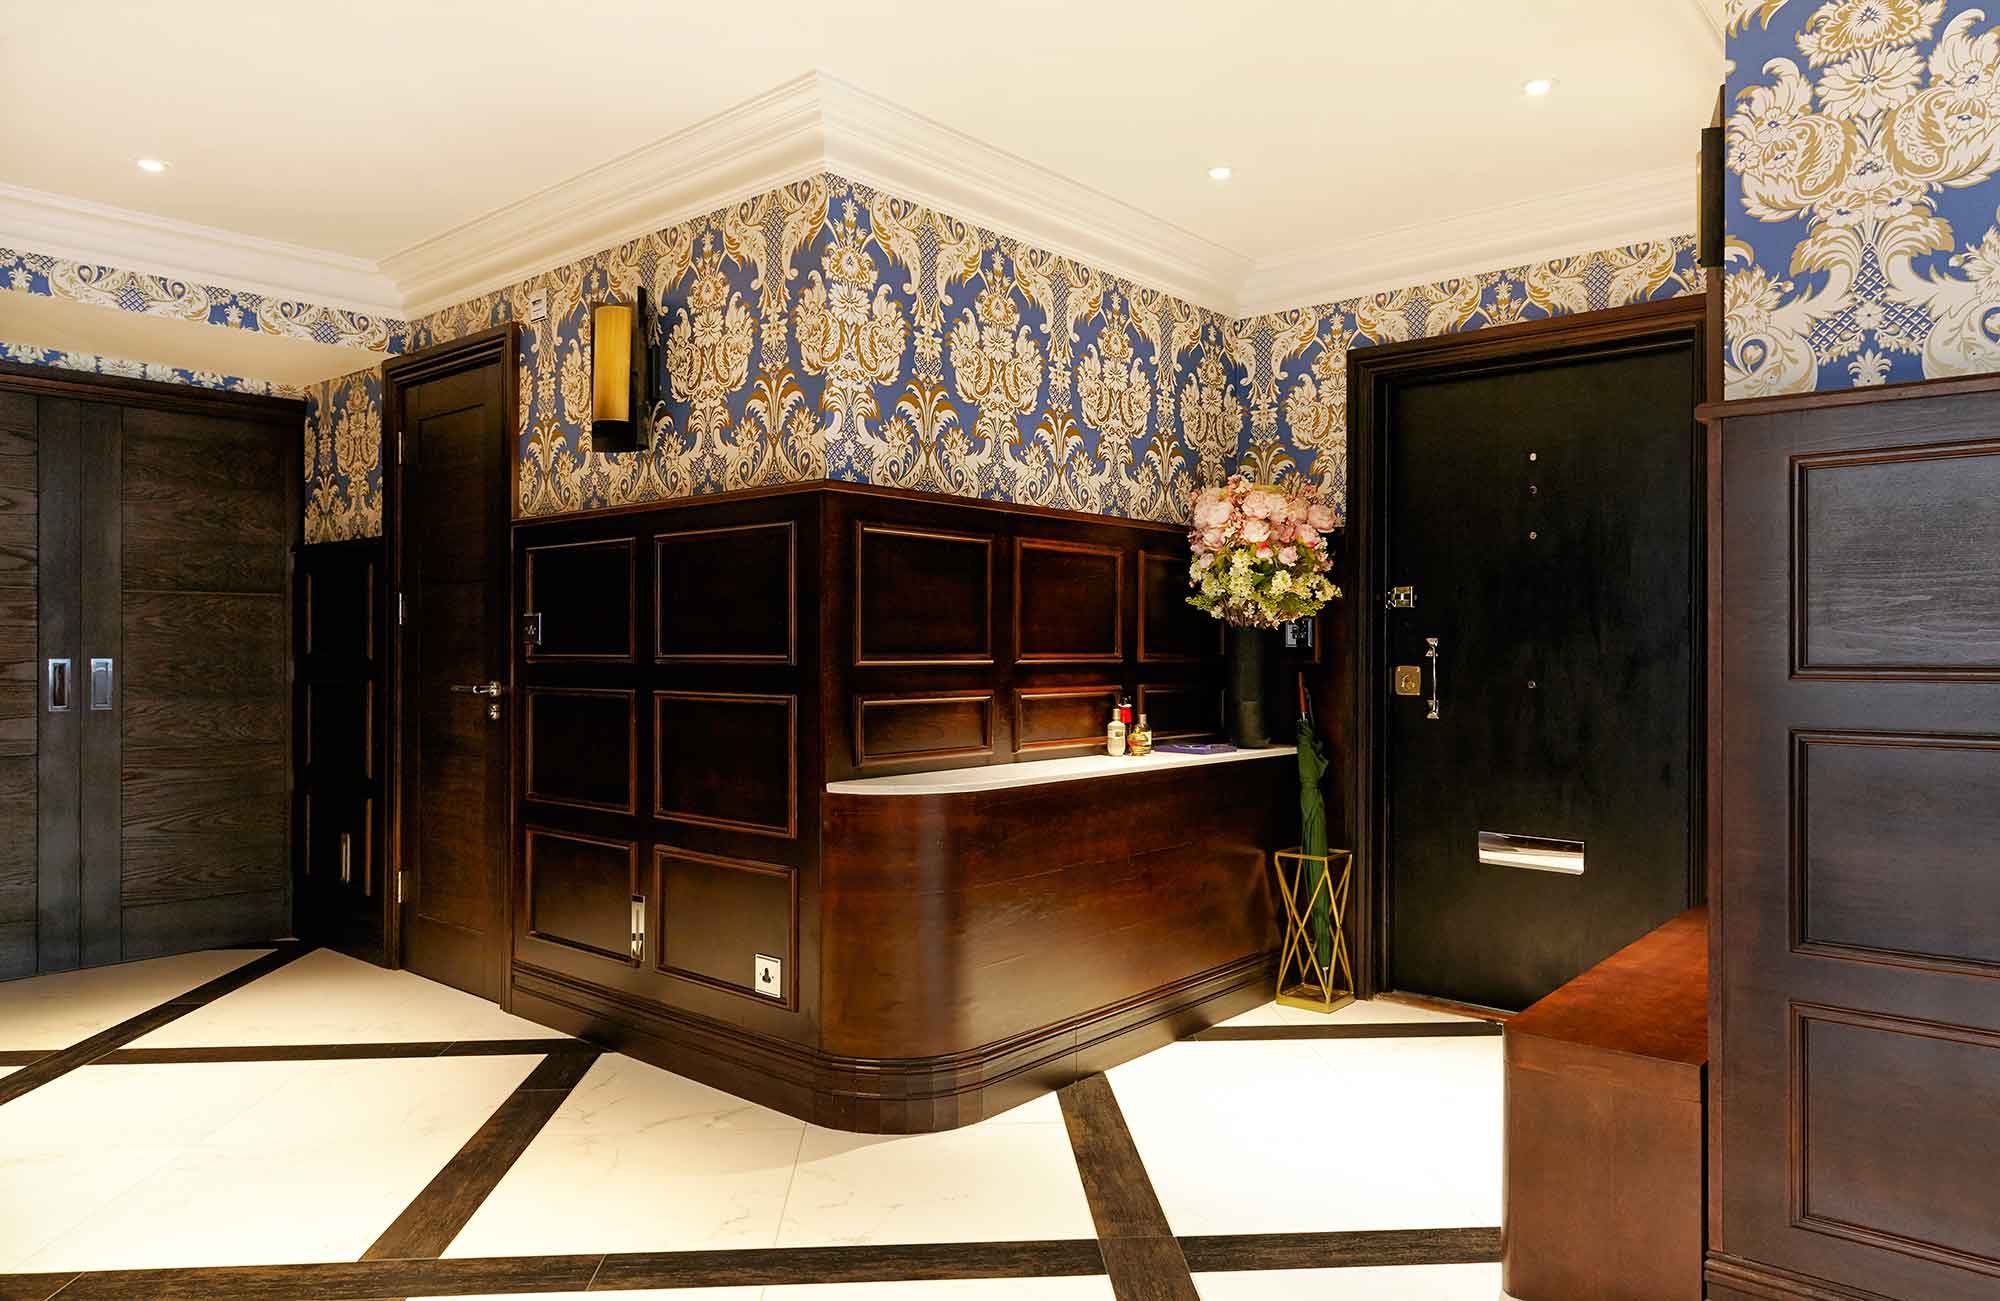 Porcelanosa tiles, Cole and Sons wallpaper, Porta Romana lighting and bespoke wood panelling make quite the entrance